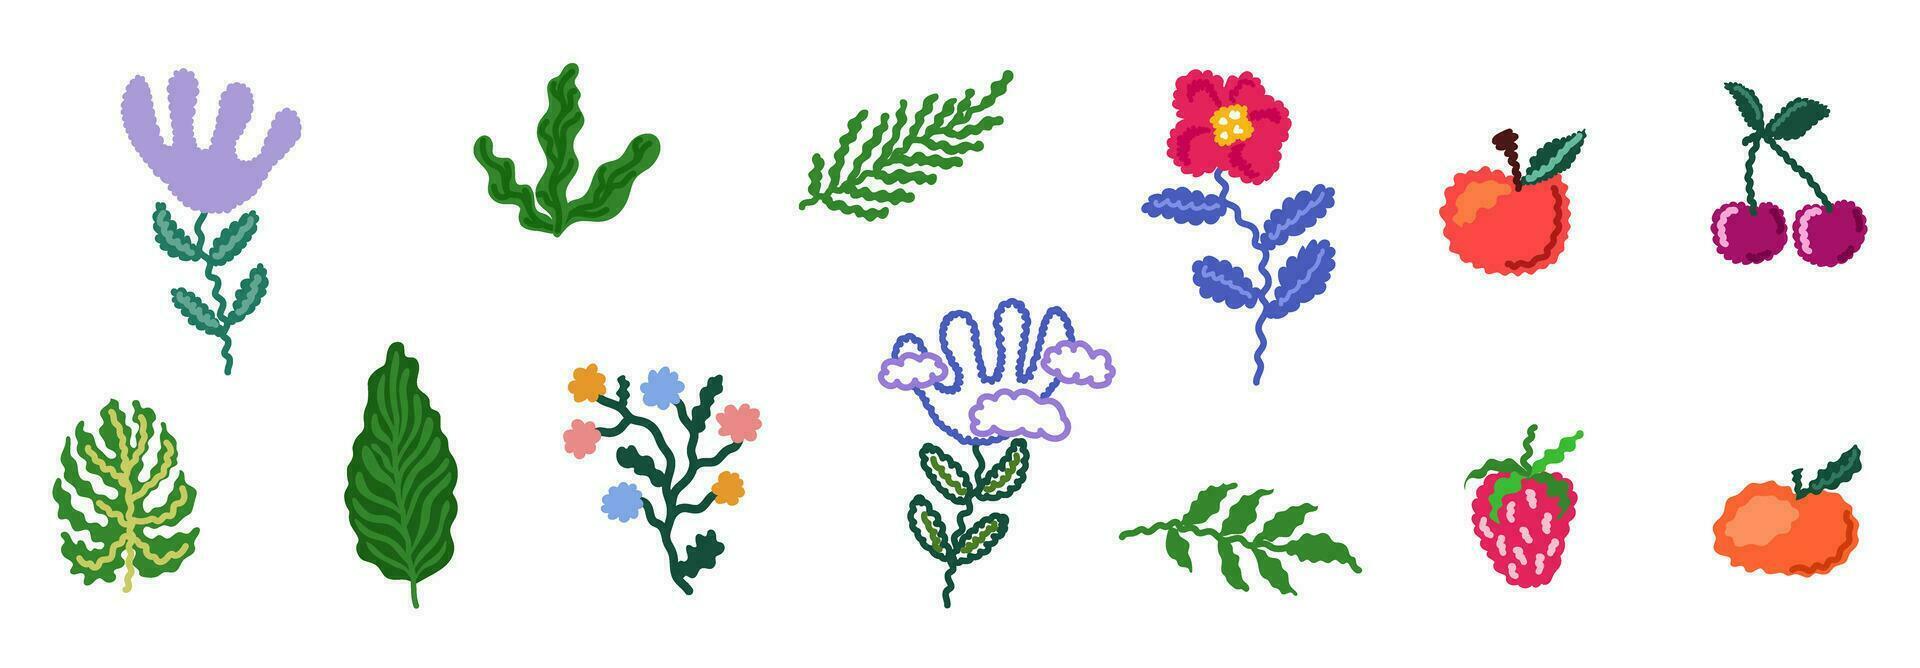 Set of a naive art style tropical floral doodles vector